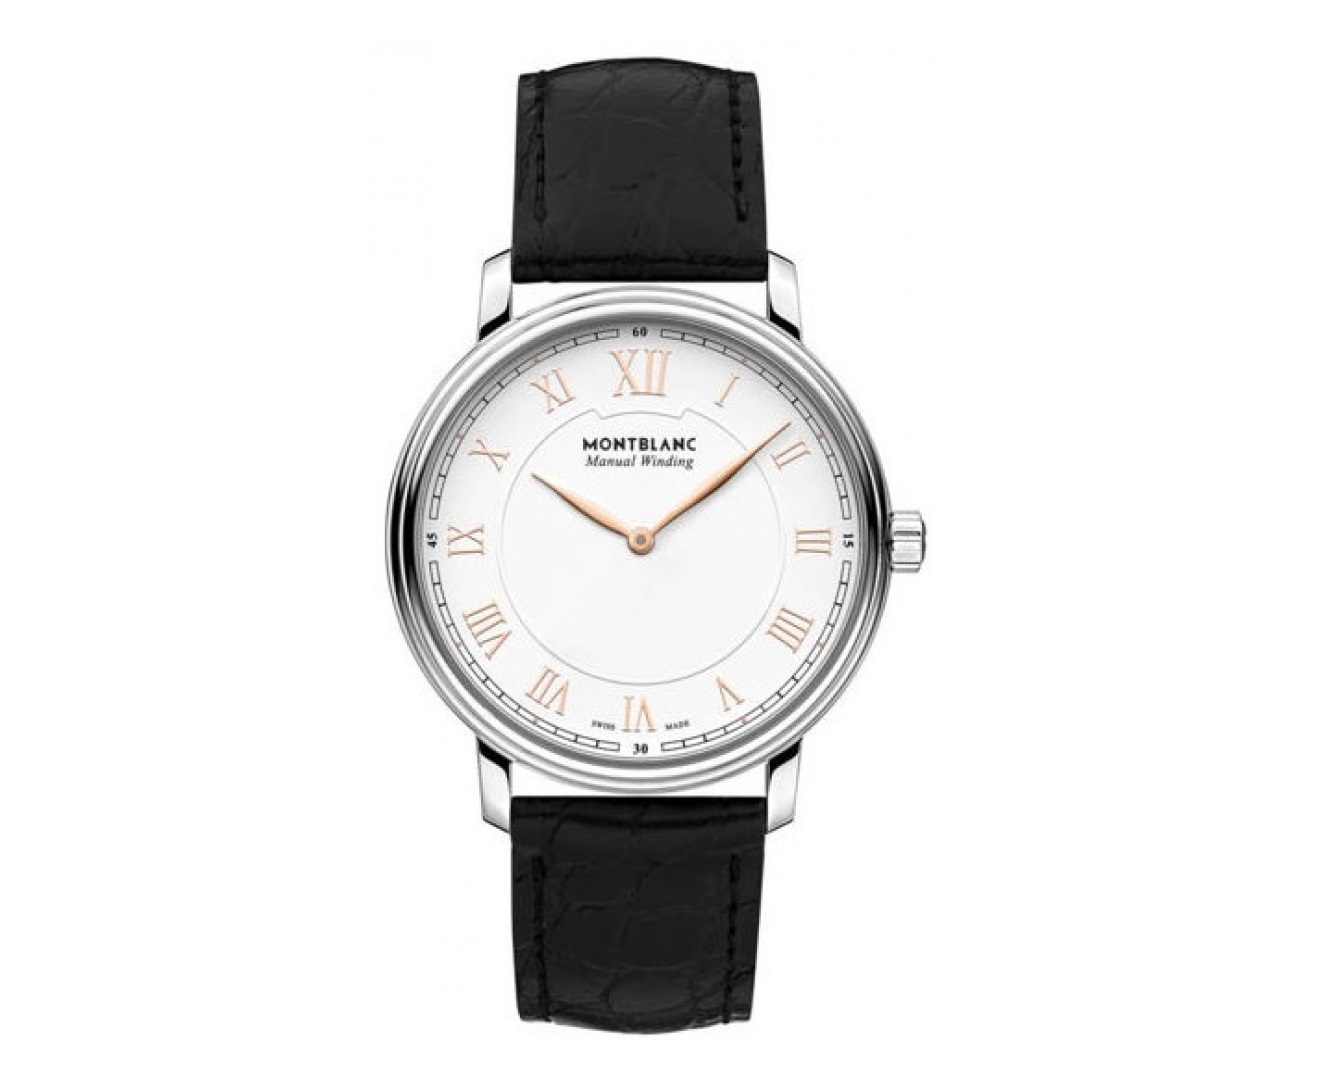 MONTBLANC Tradition Hand Wind White Dial Watch 119962